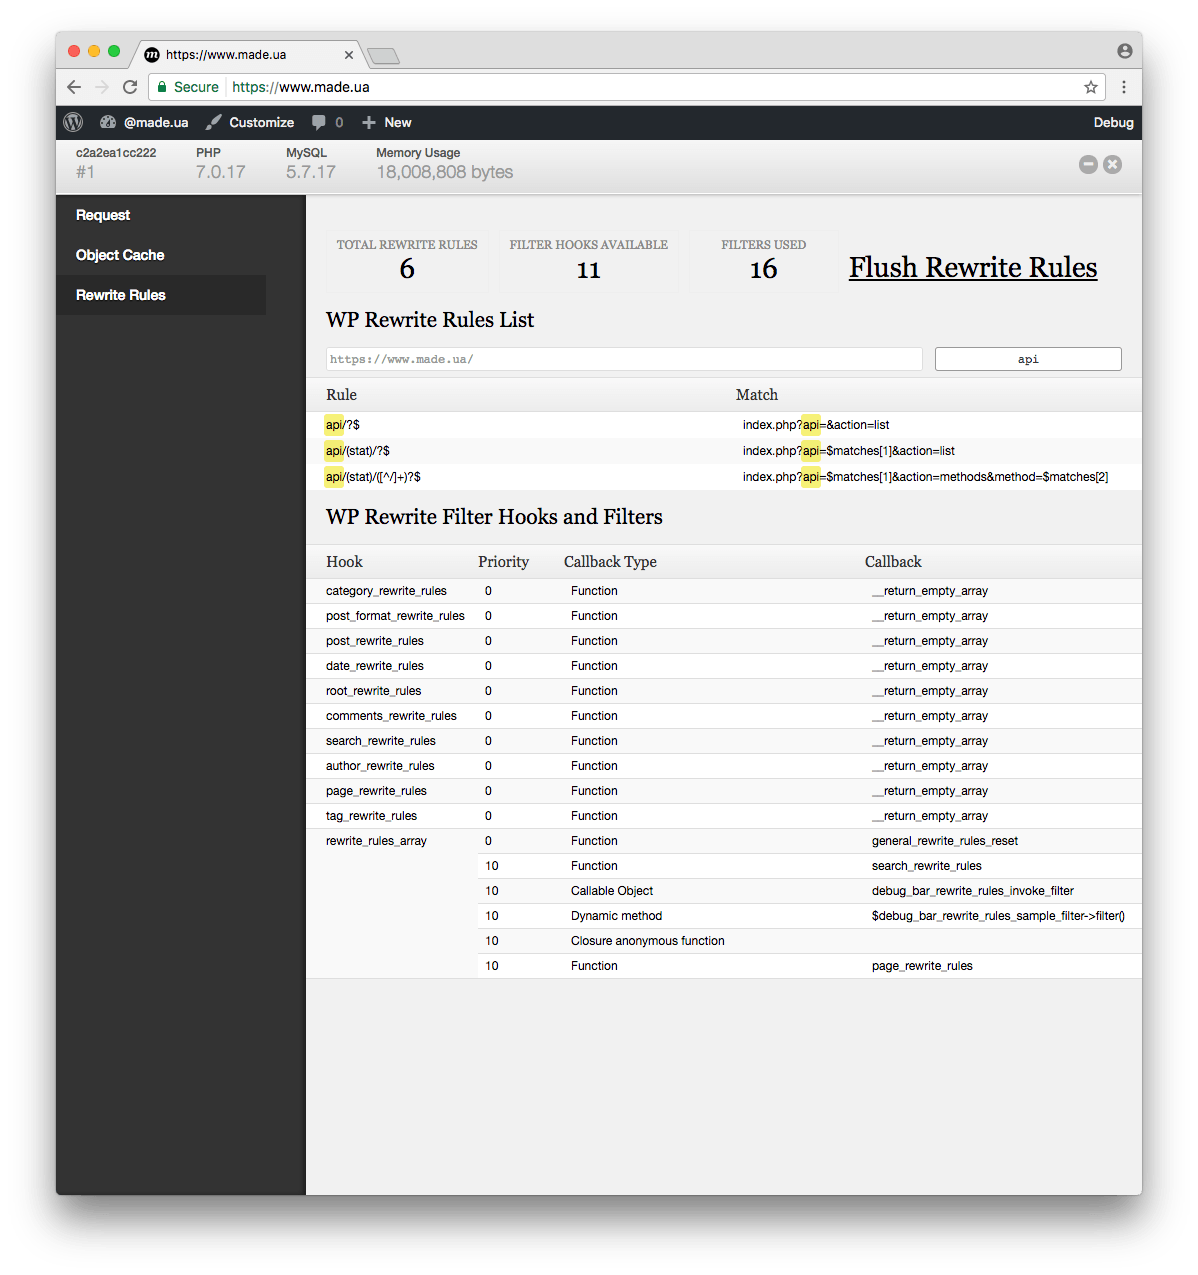 Searching in rules list alongside with filtering and highlighting occurrences.